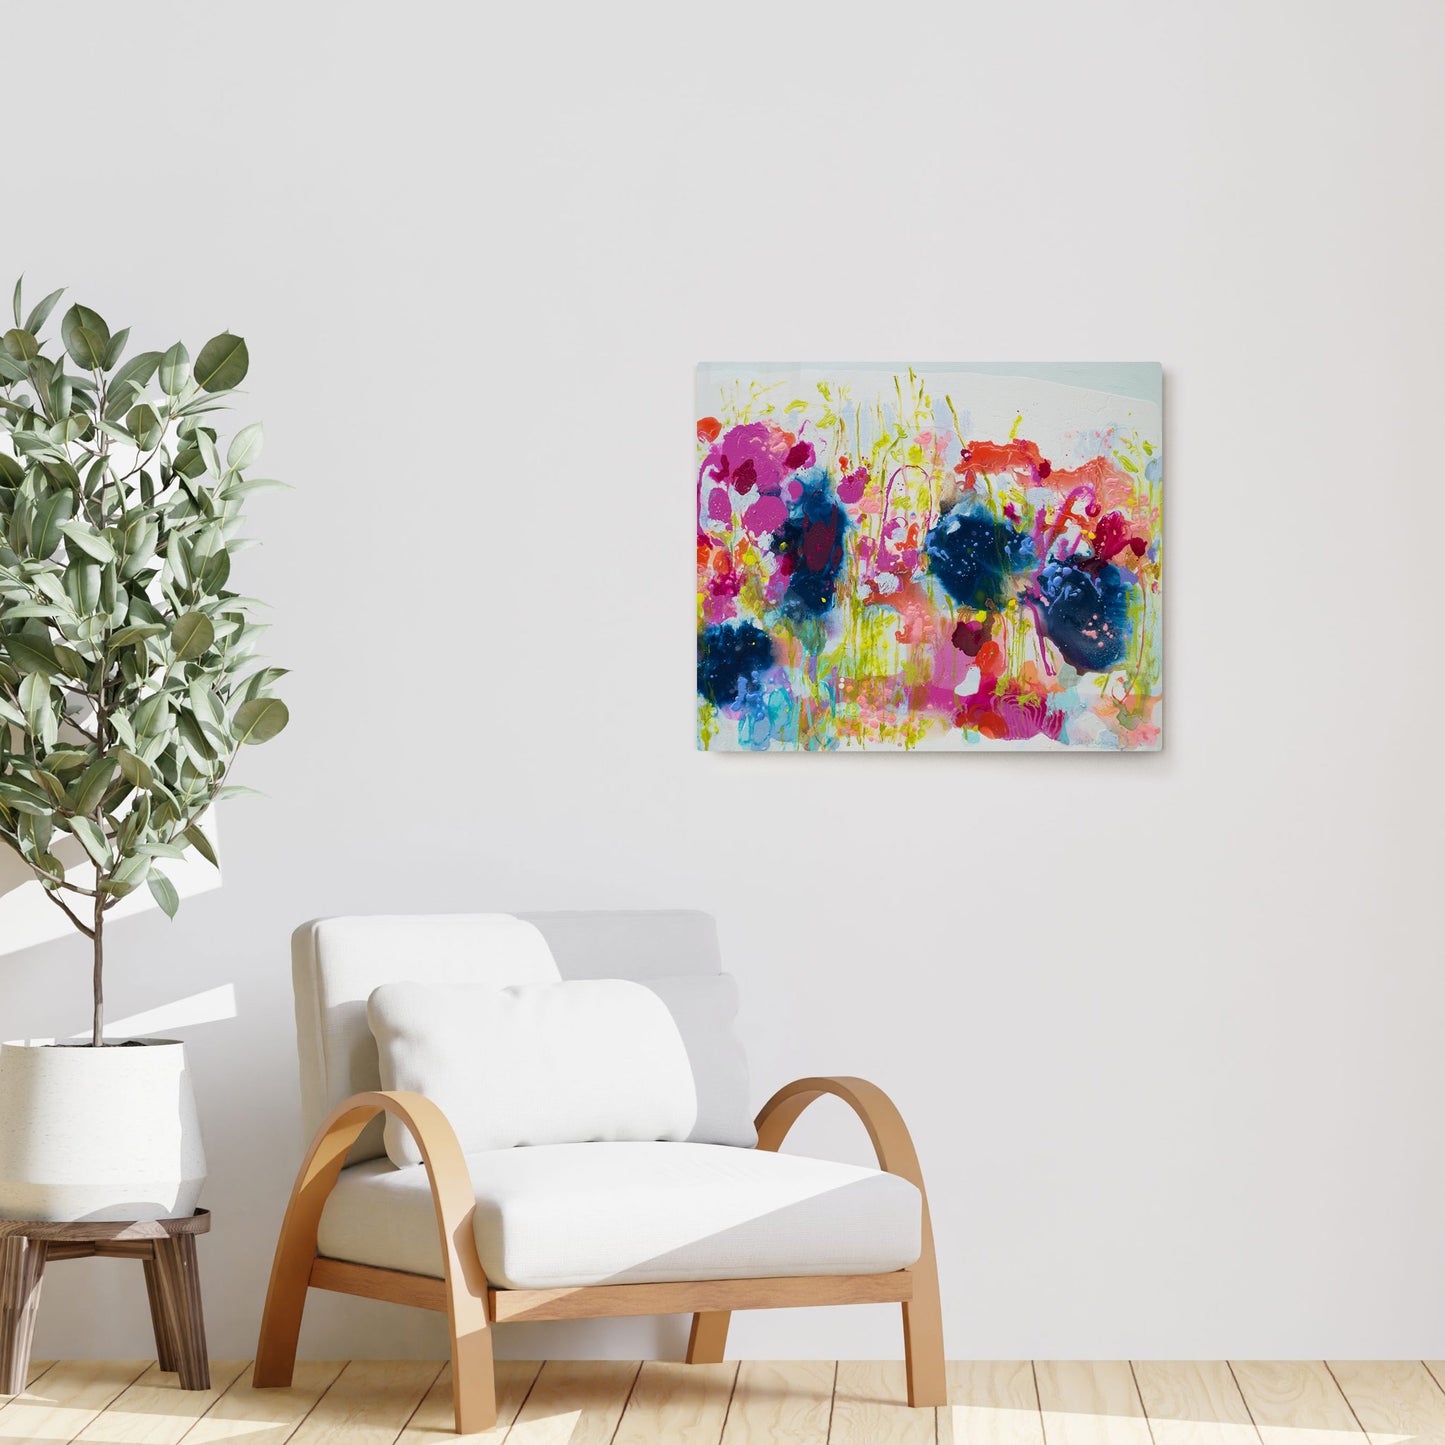 Claire Desjardins' July Heat painting reproduced on HD metal print and displayed on wall